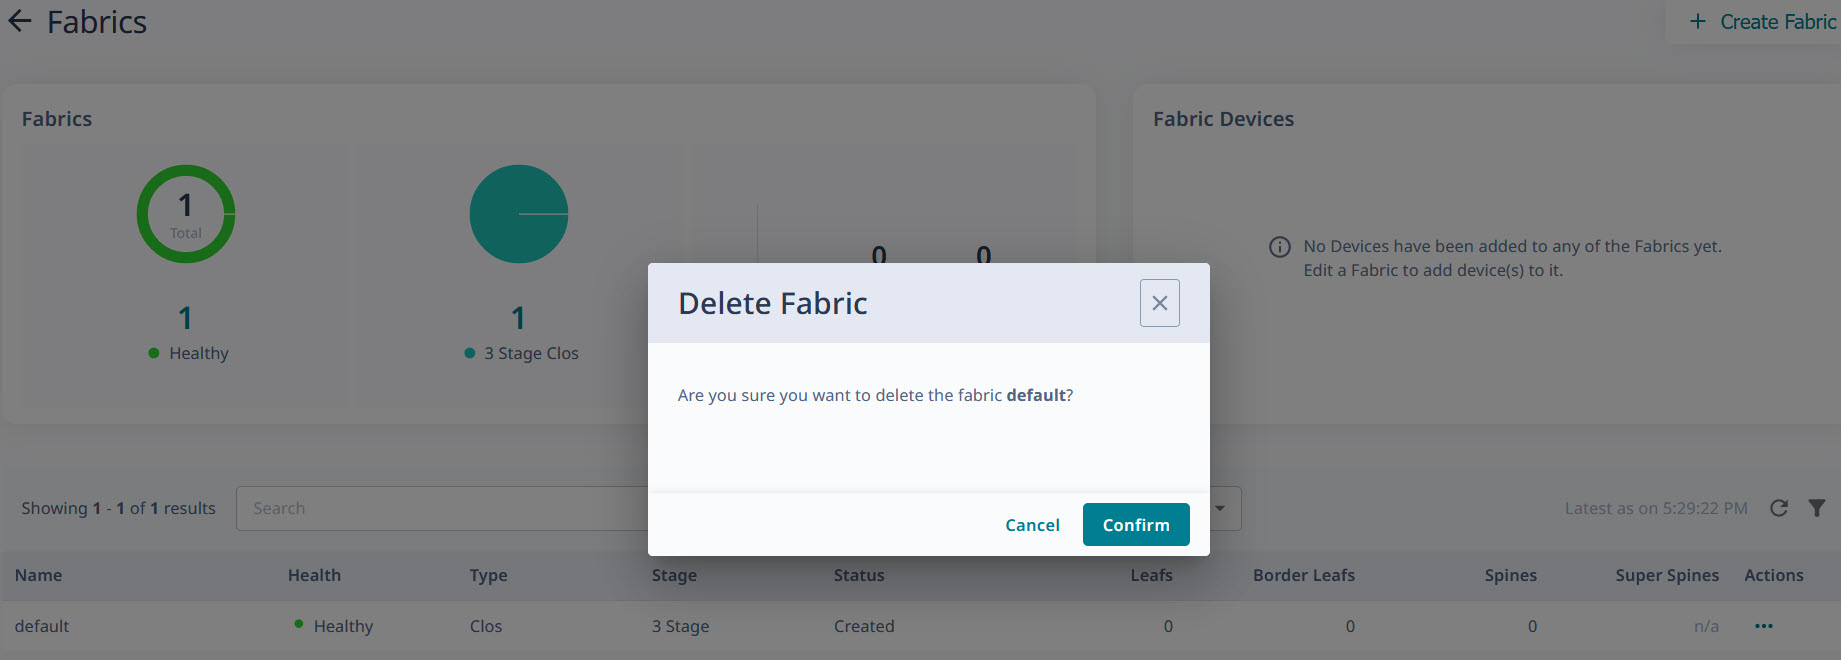 Delete fabric from the fabrics page